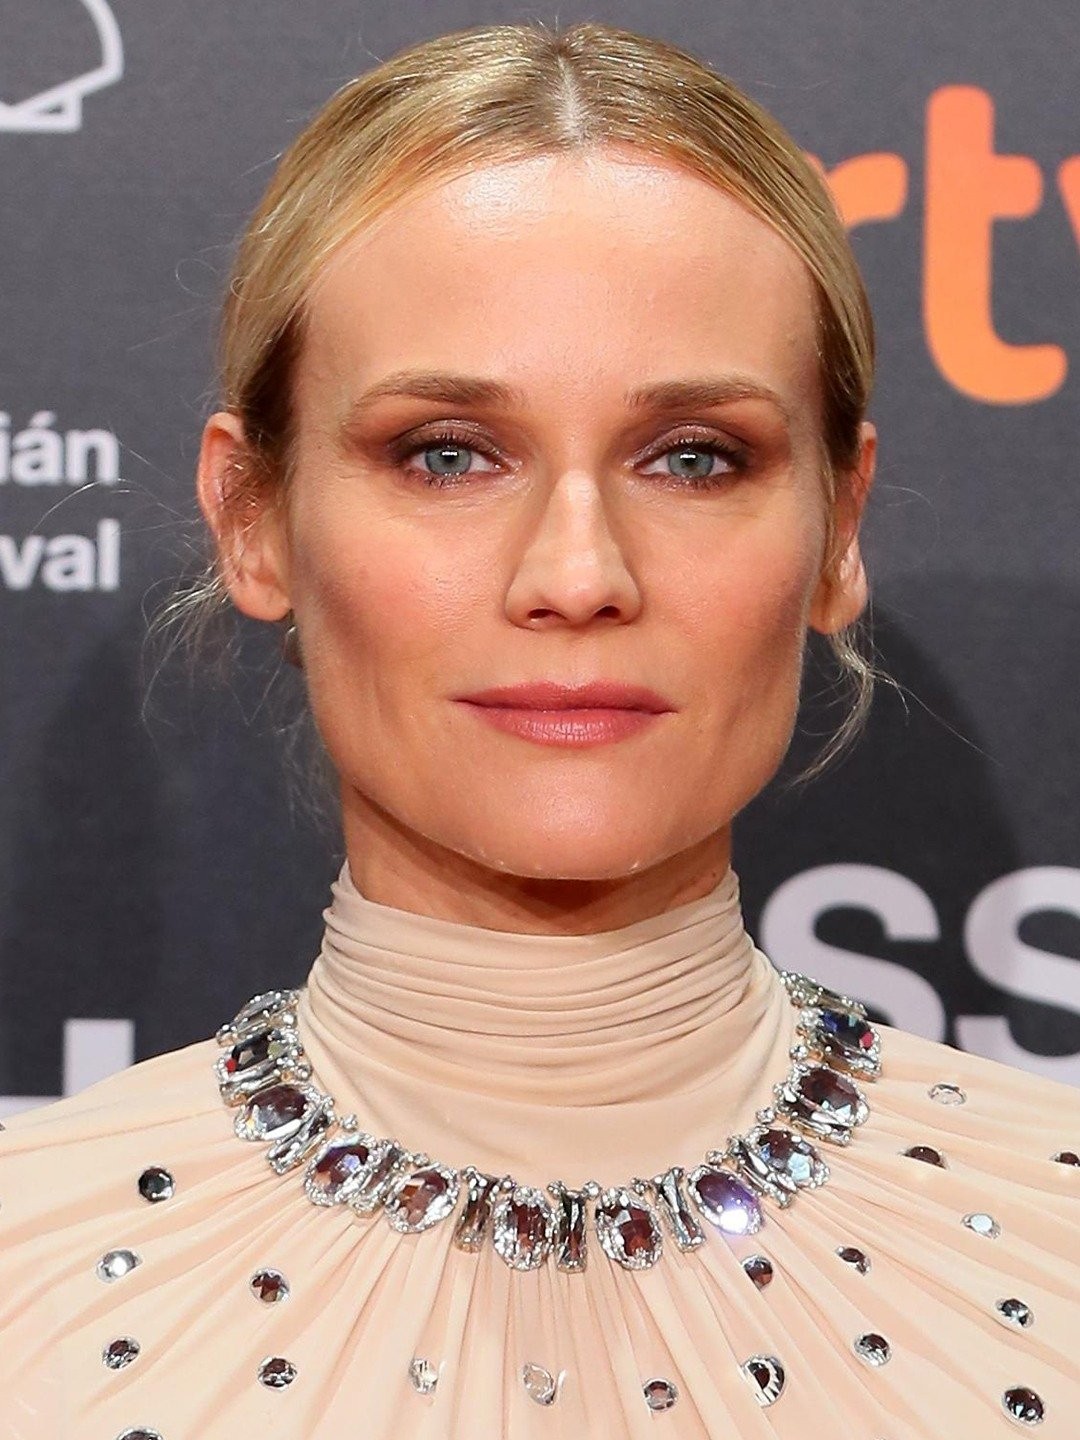 41 style lessons we can learn from Diane Kruger as she celebrates